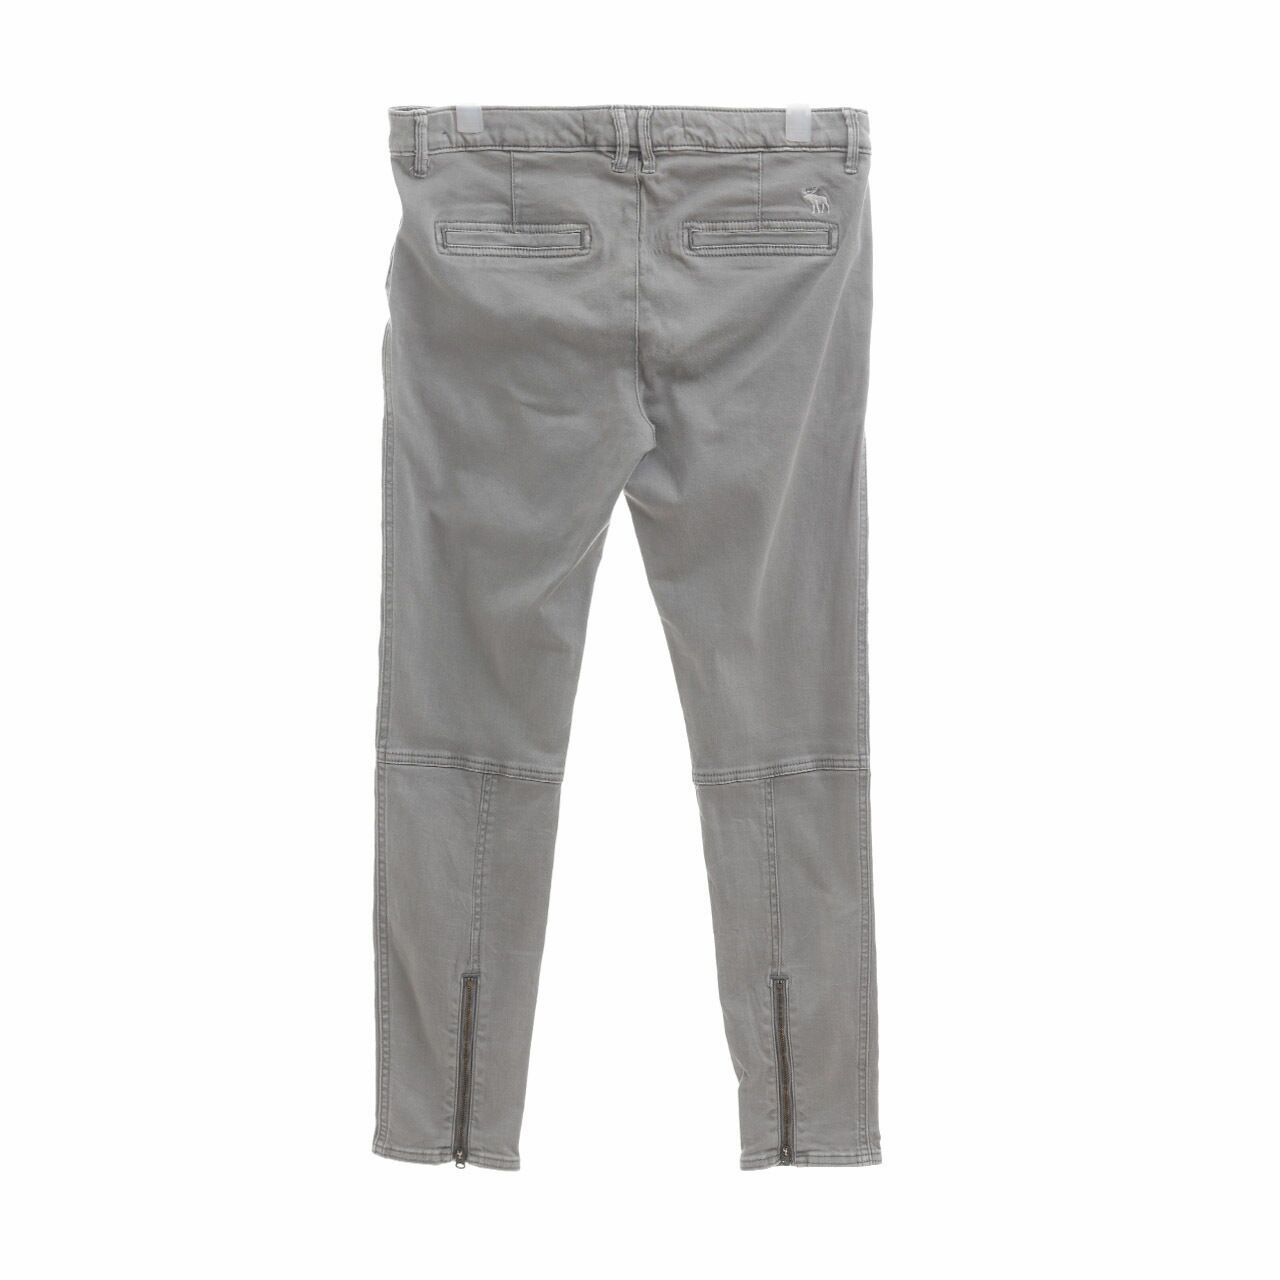 Abercrombie & Fitch Green Washed Long Pants